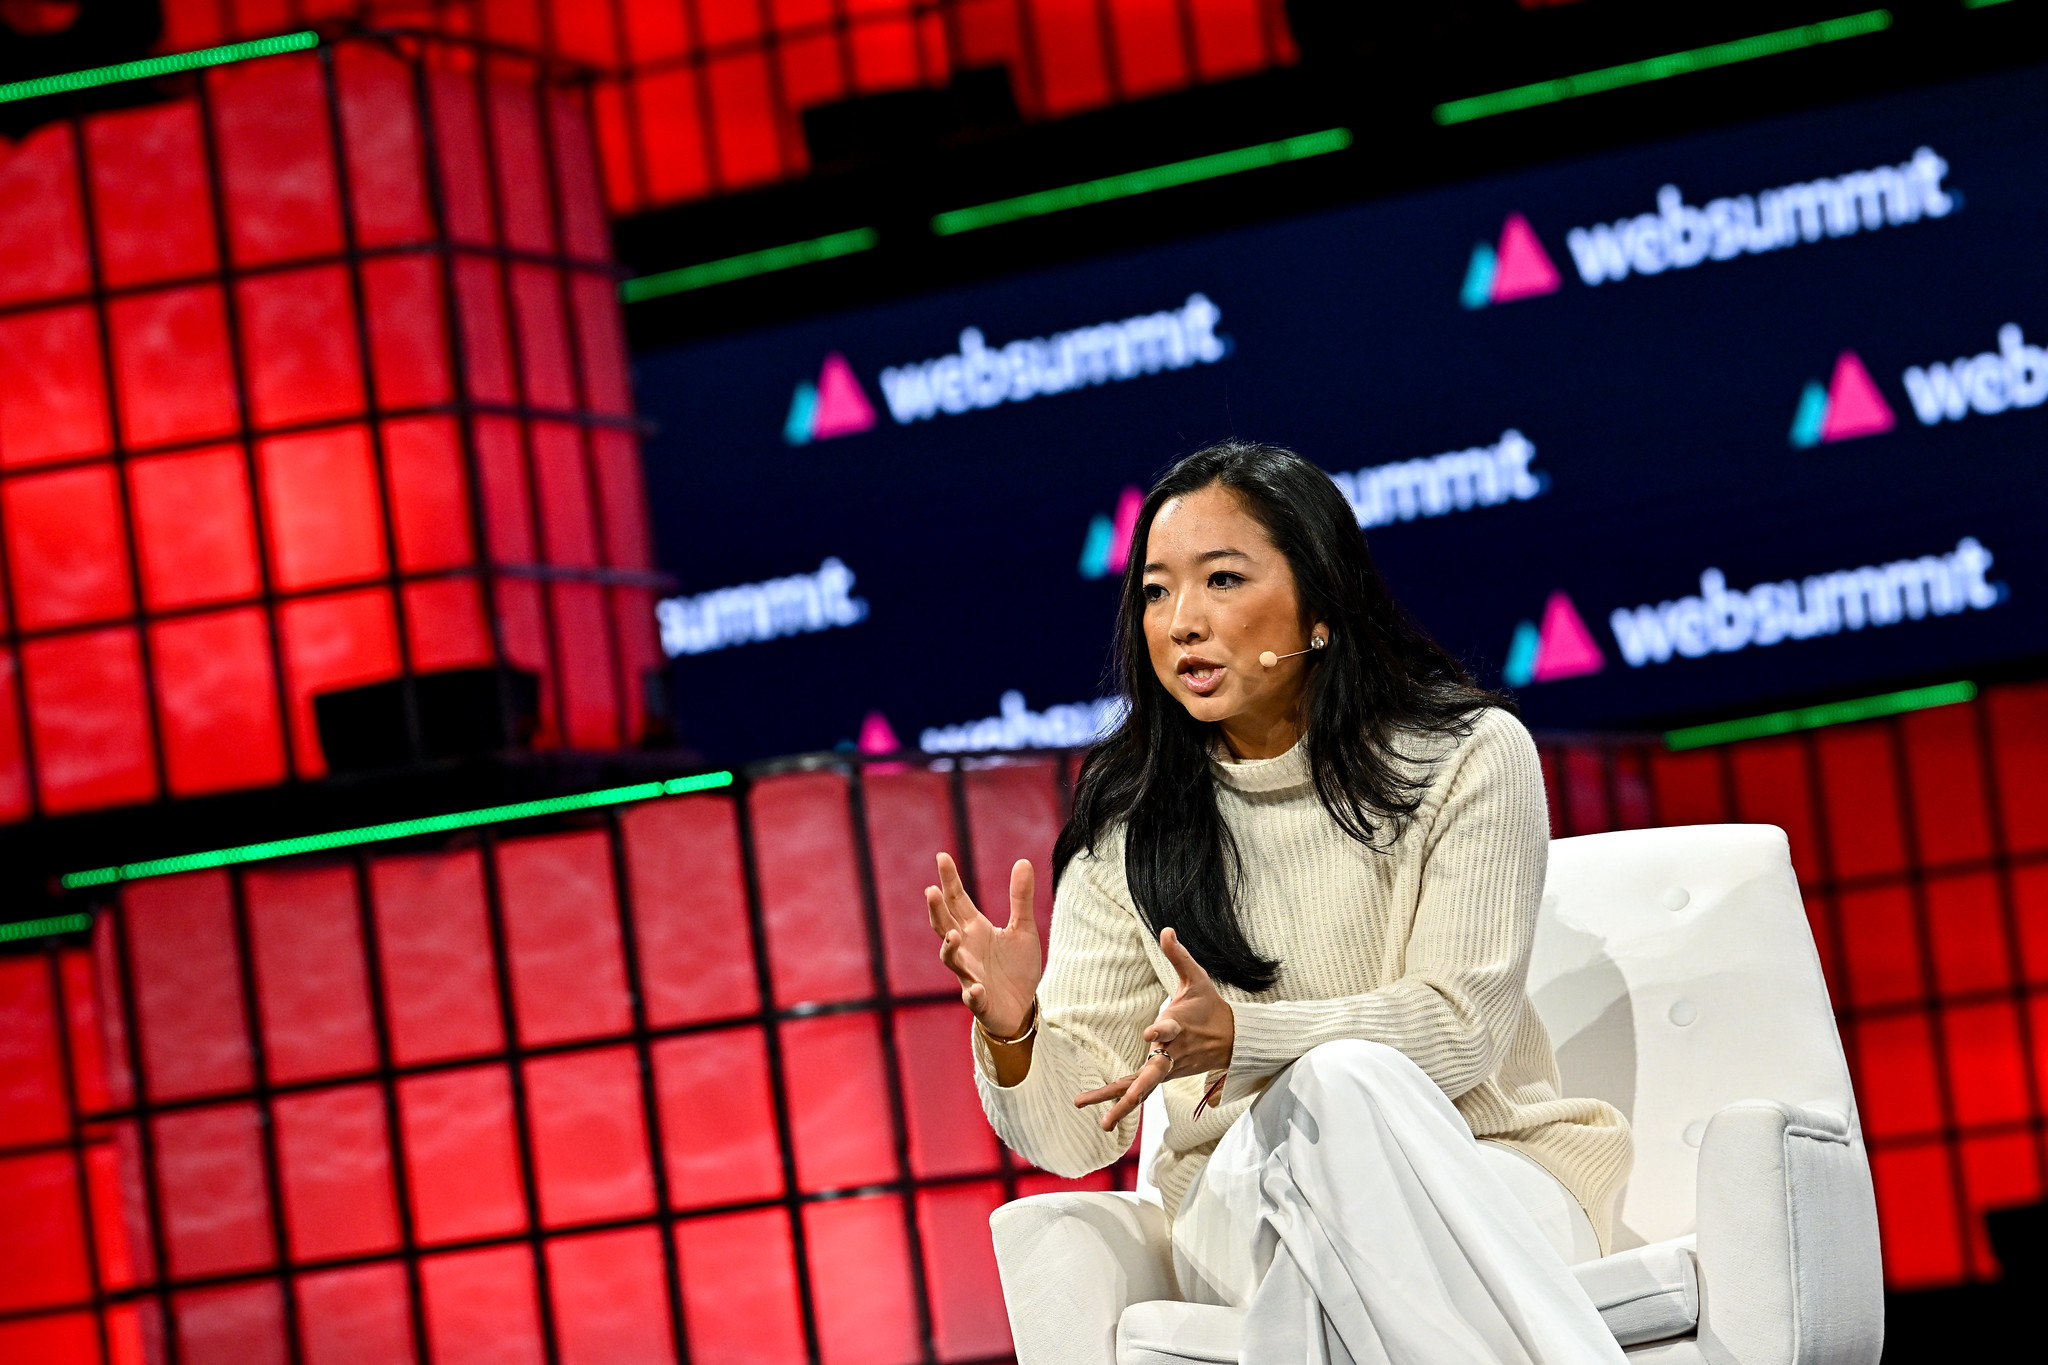 Sita Chantramonklasri, Founder & Principal, Siam Capital, on Centre Stage during day three of Web Summit 2023 at the Altice Arena in Lisbon, Portugal